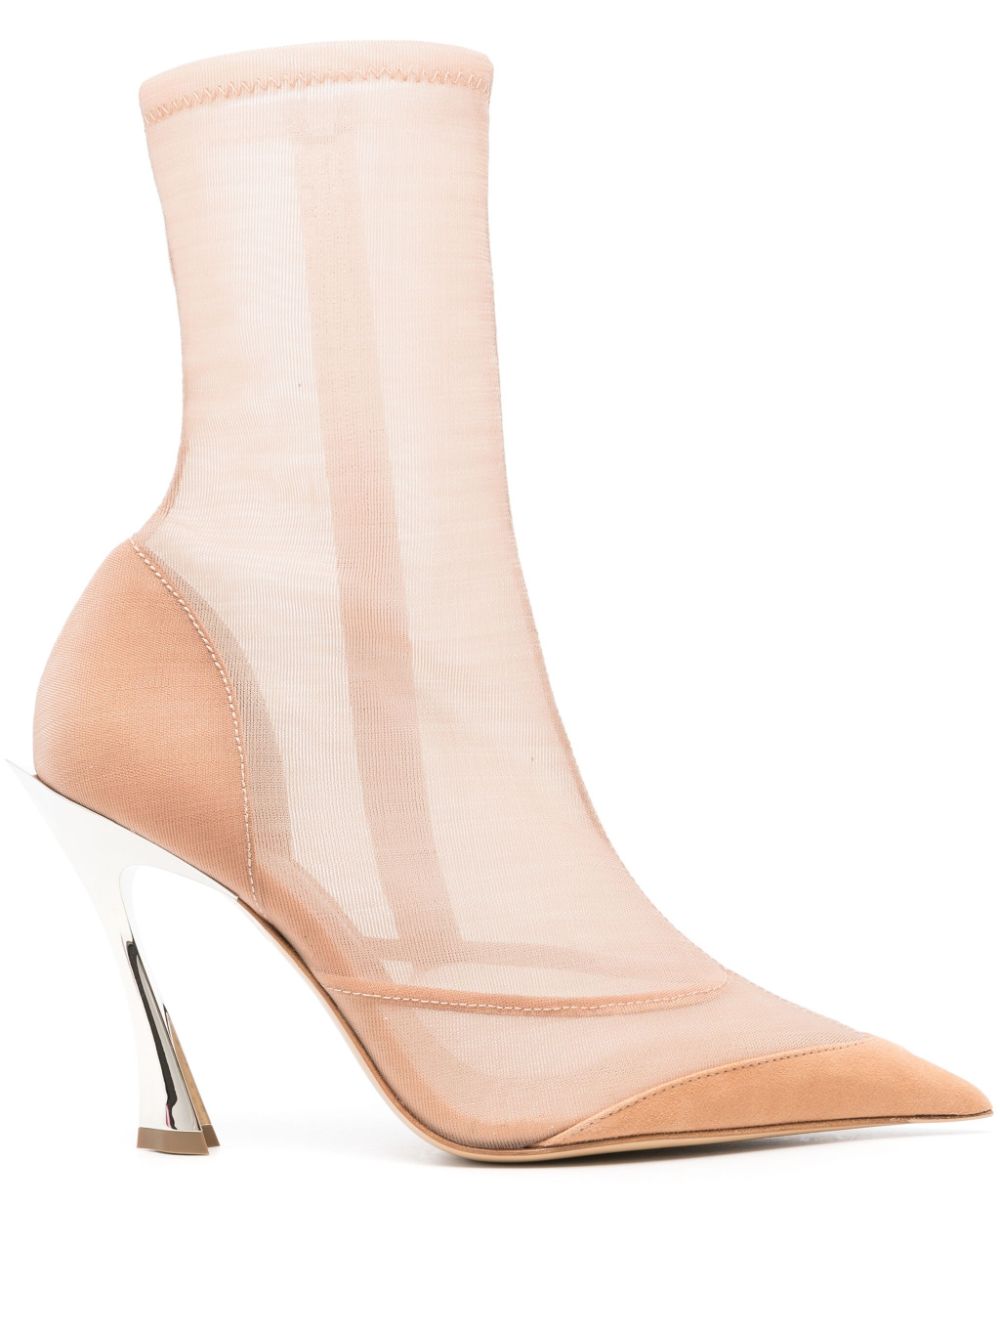 Mugler 100mm Semi-sheer Ankles Boots In Neutral